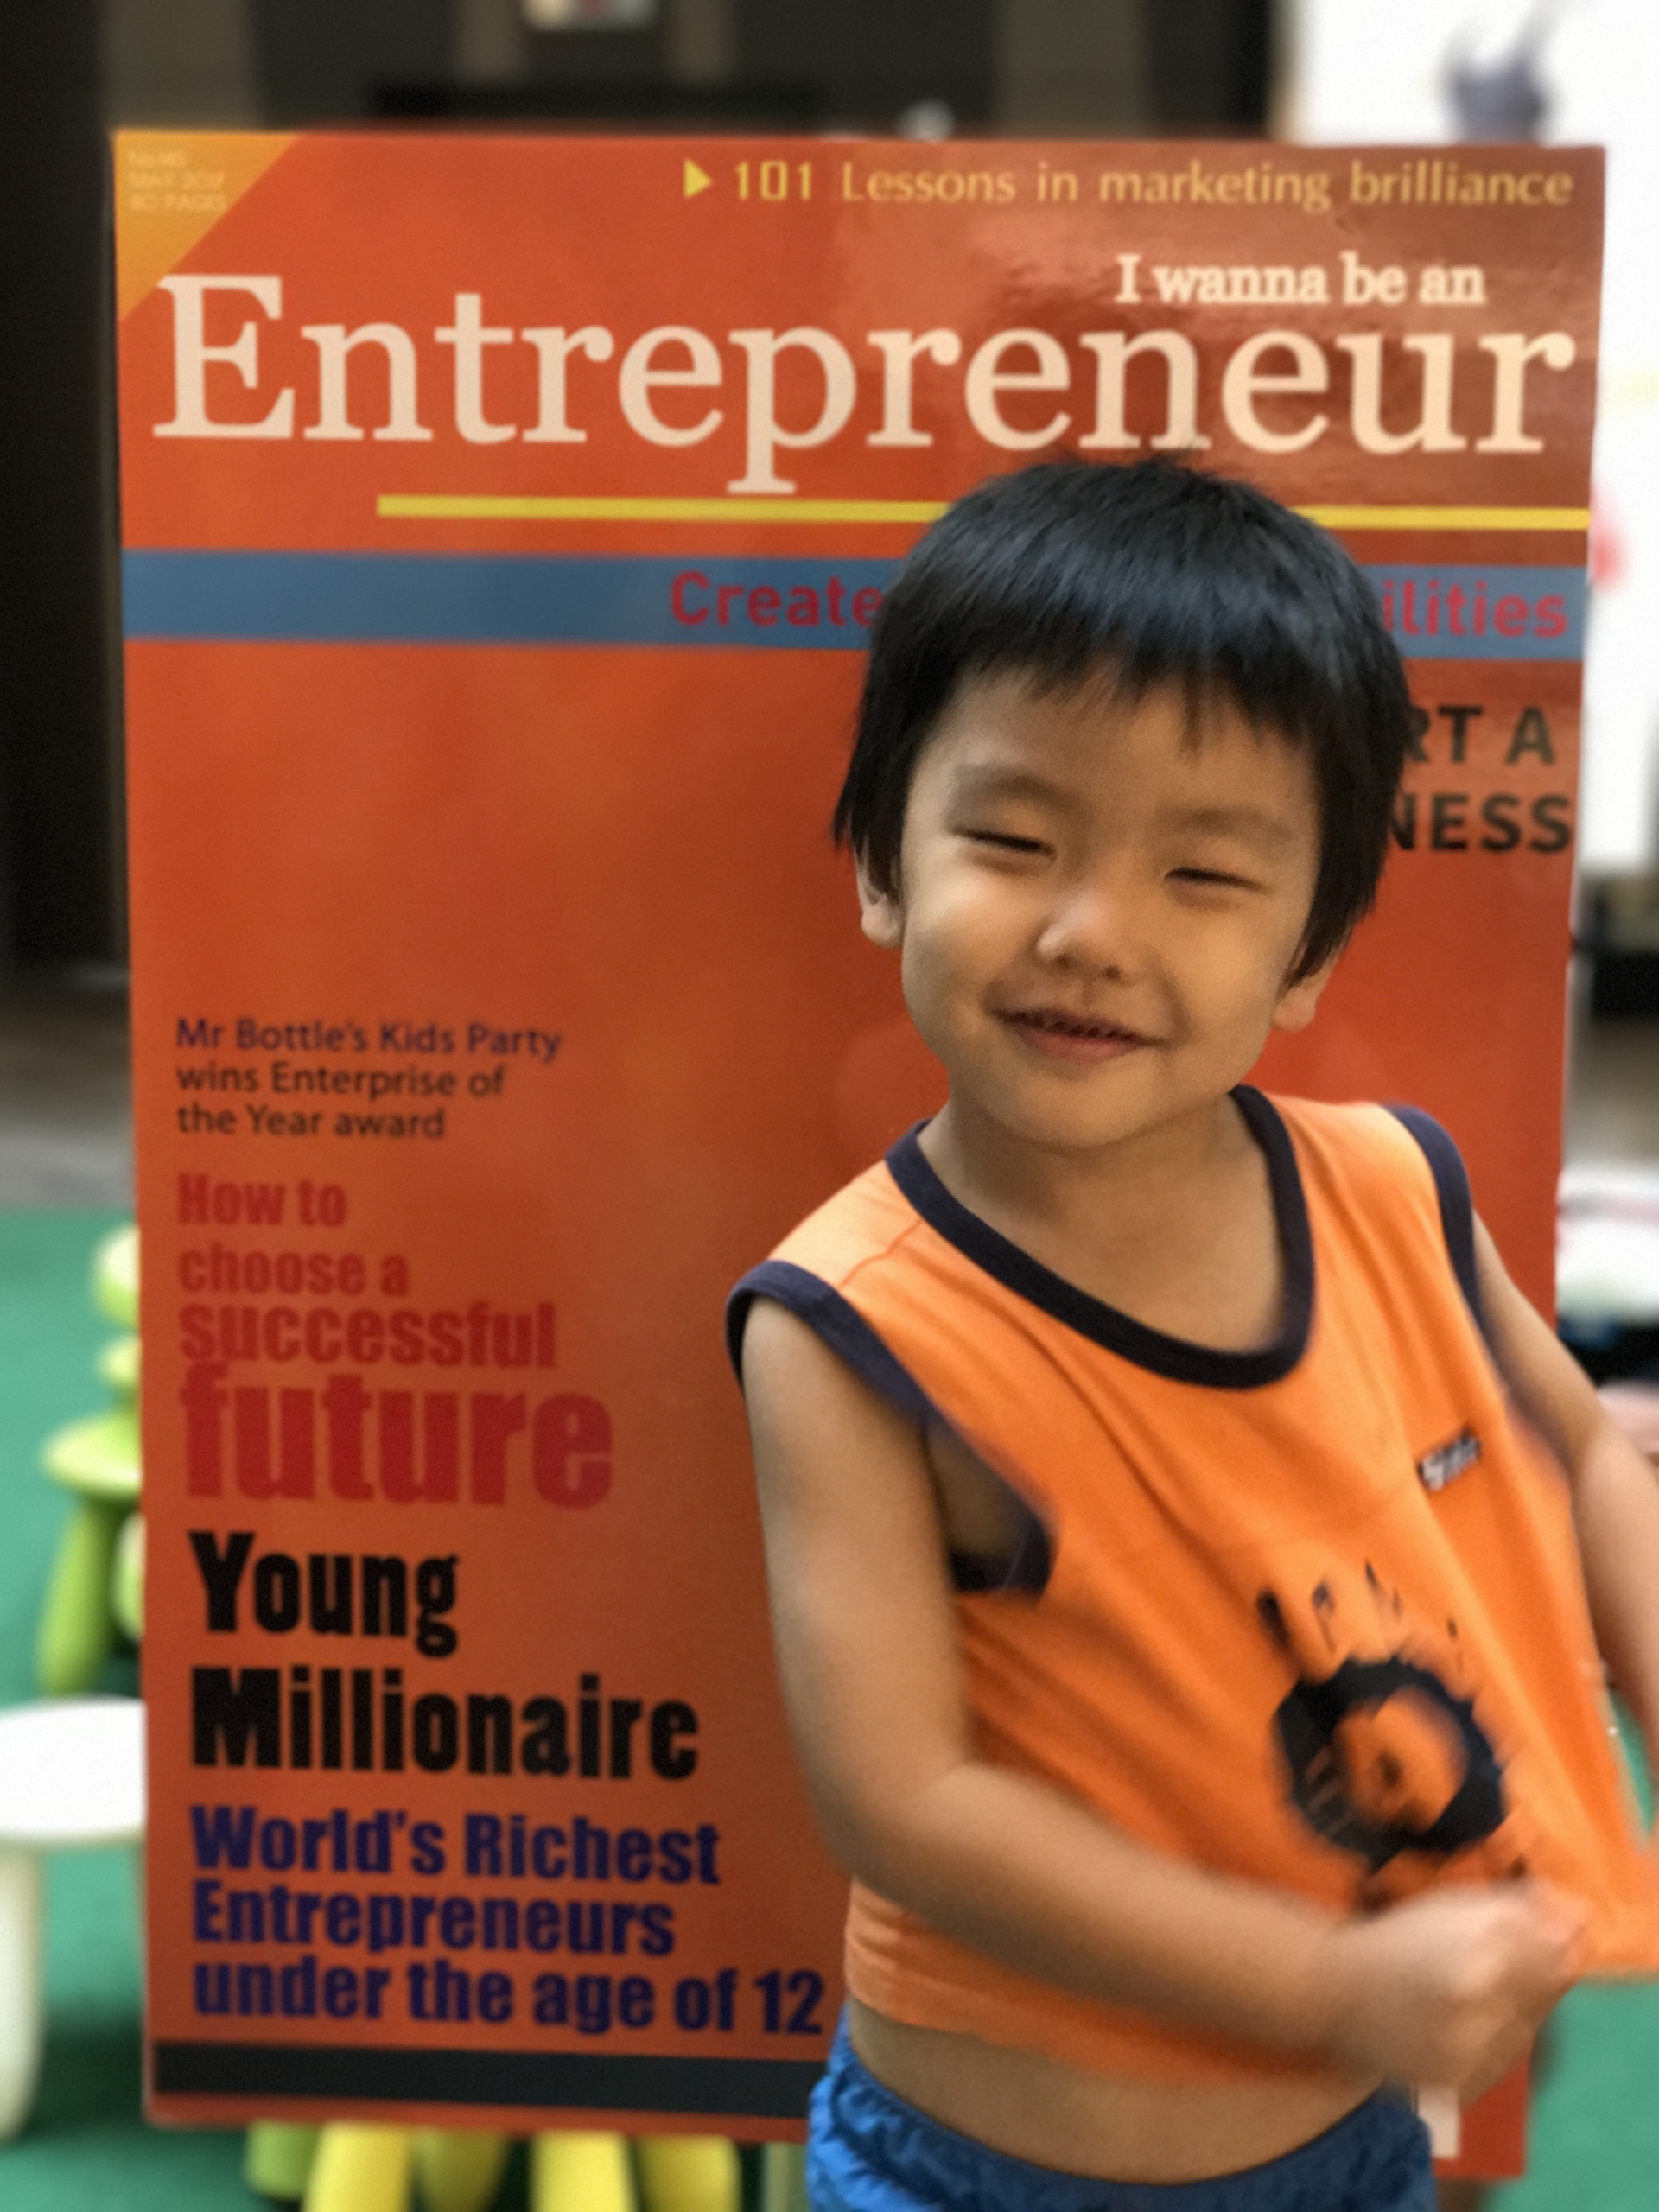 Are you on the cover of Entrepreneur magazine?